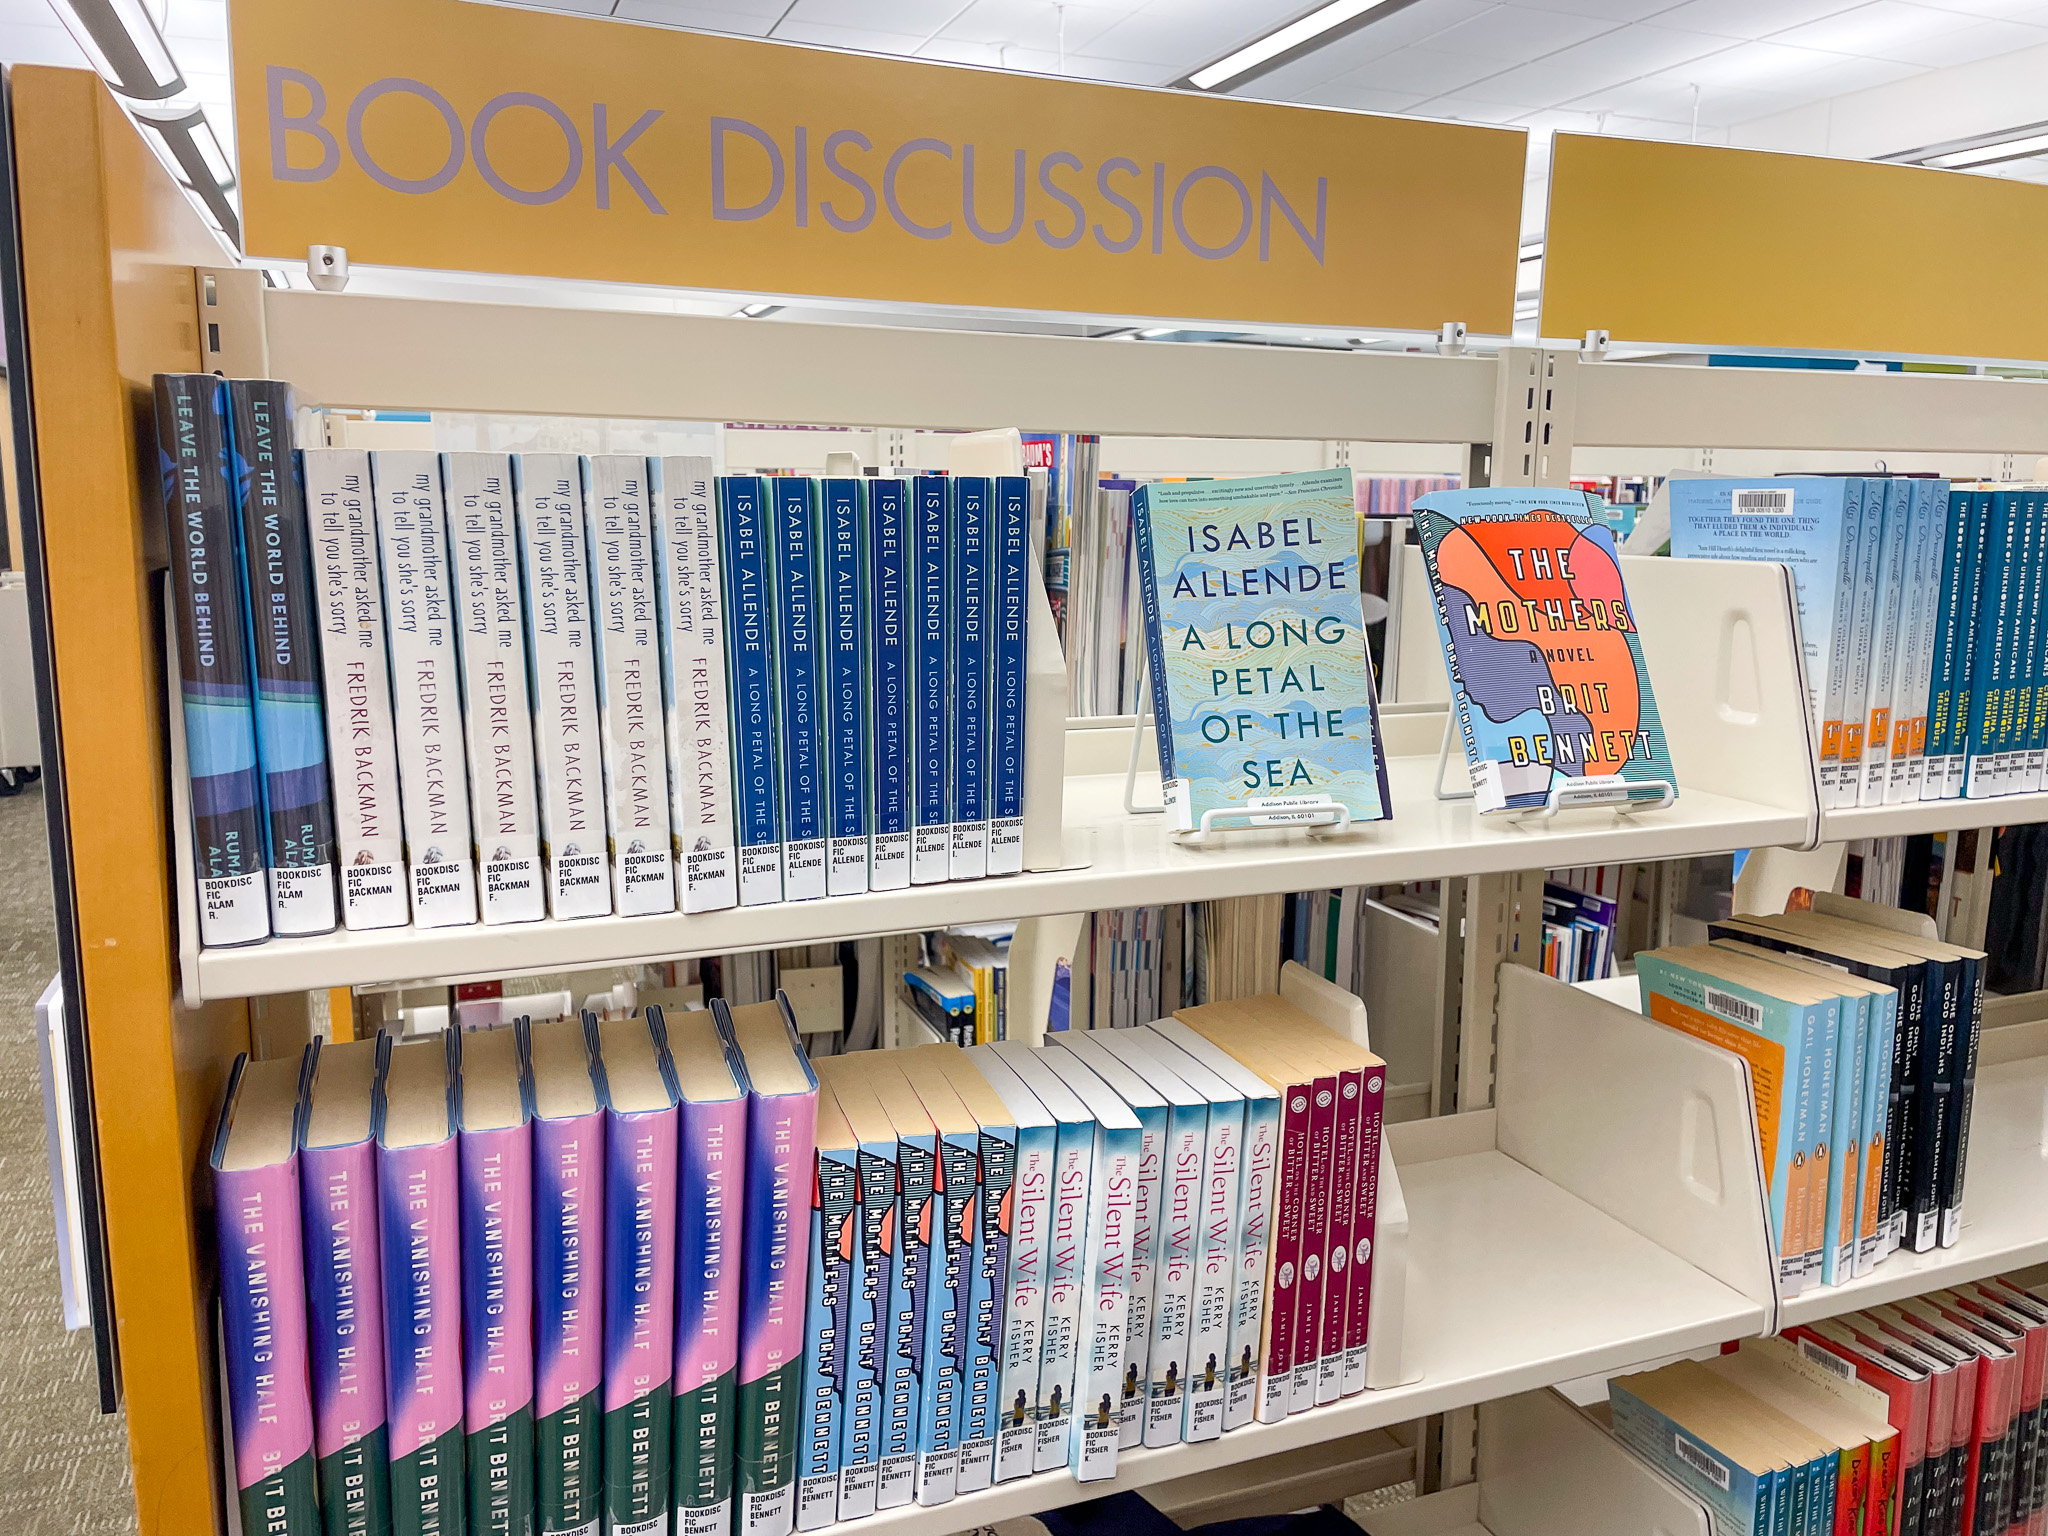 "Book discussion books on the shelf at the library"